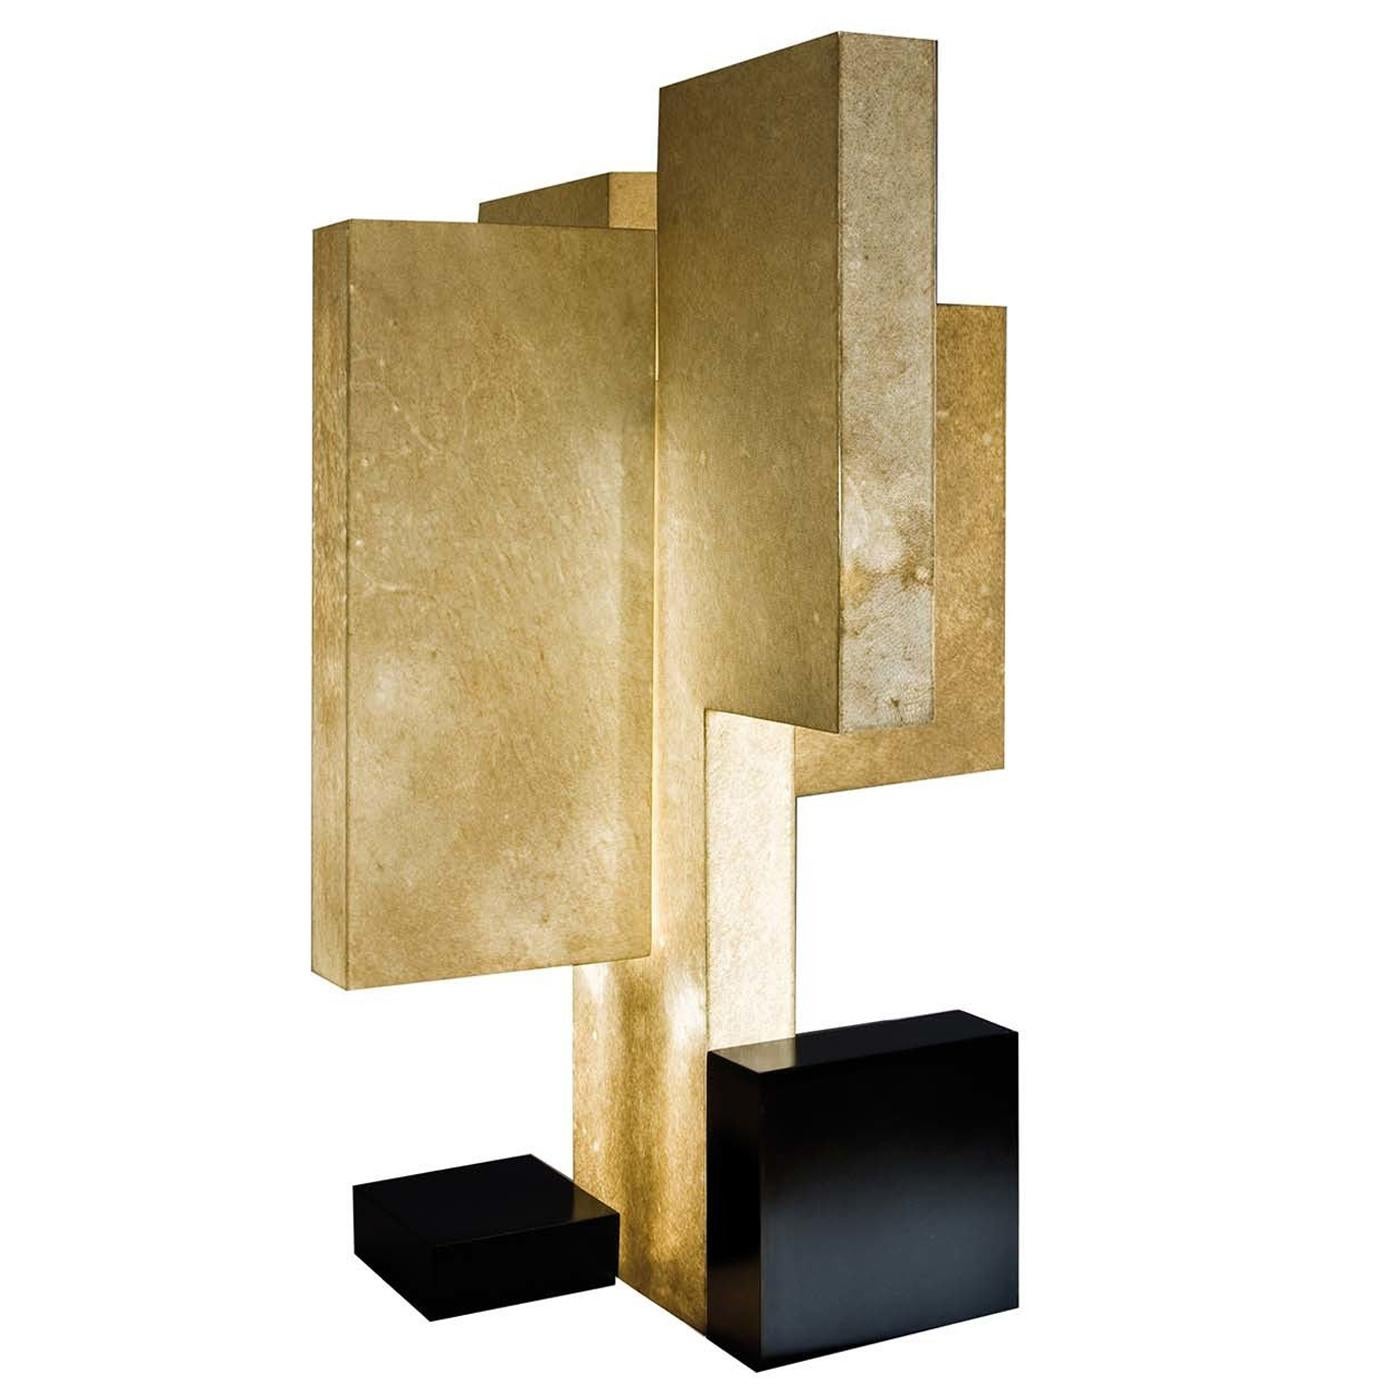 Laurameroni "Novecentotrenta" Modern Architectural Table Lamp in Parchment